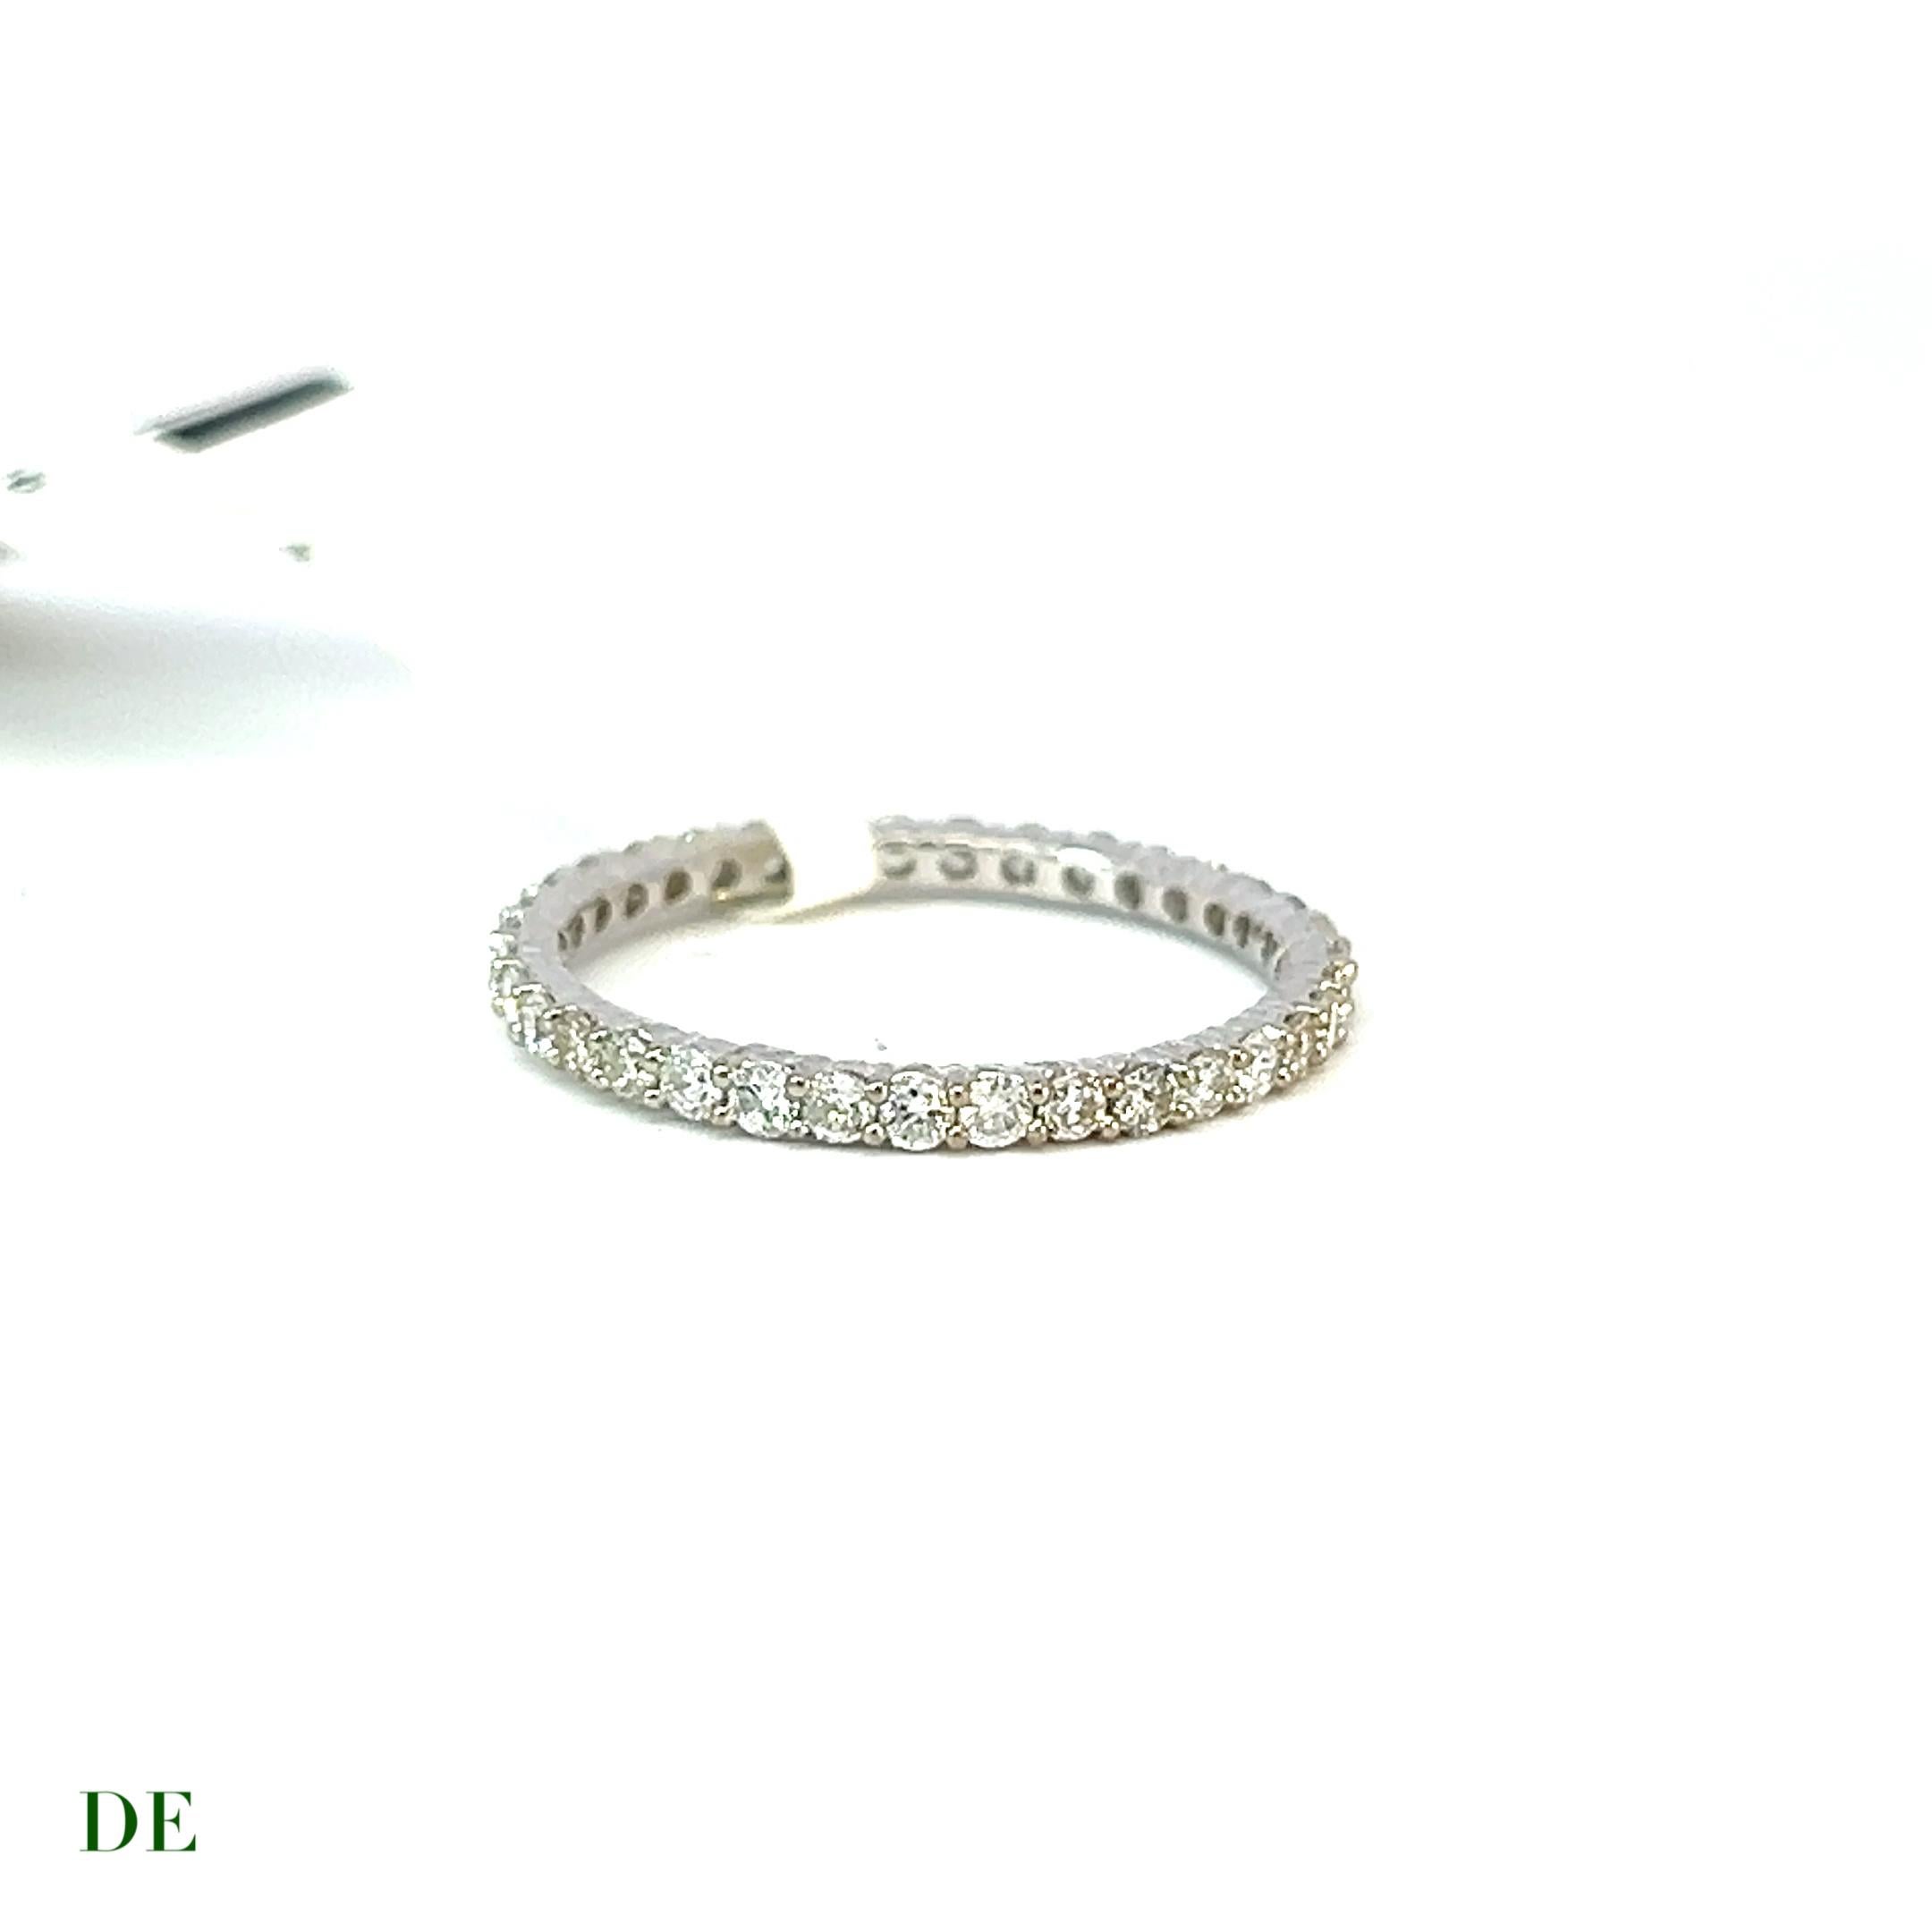 Classic 14k Gold .686 Carat Elegant Eternity Band Diamond Ring

Introducing the Classic 14k Gold .686 Carat Elegant Eternity Band Diamond Ring. This exquisite ring exudes elegance and sophistication, making it a perfect choice for those seeking a